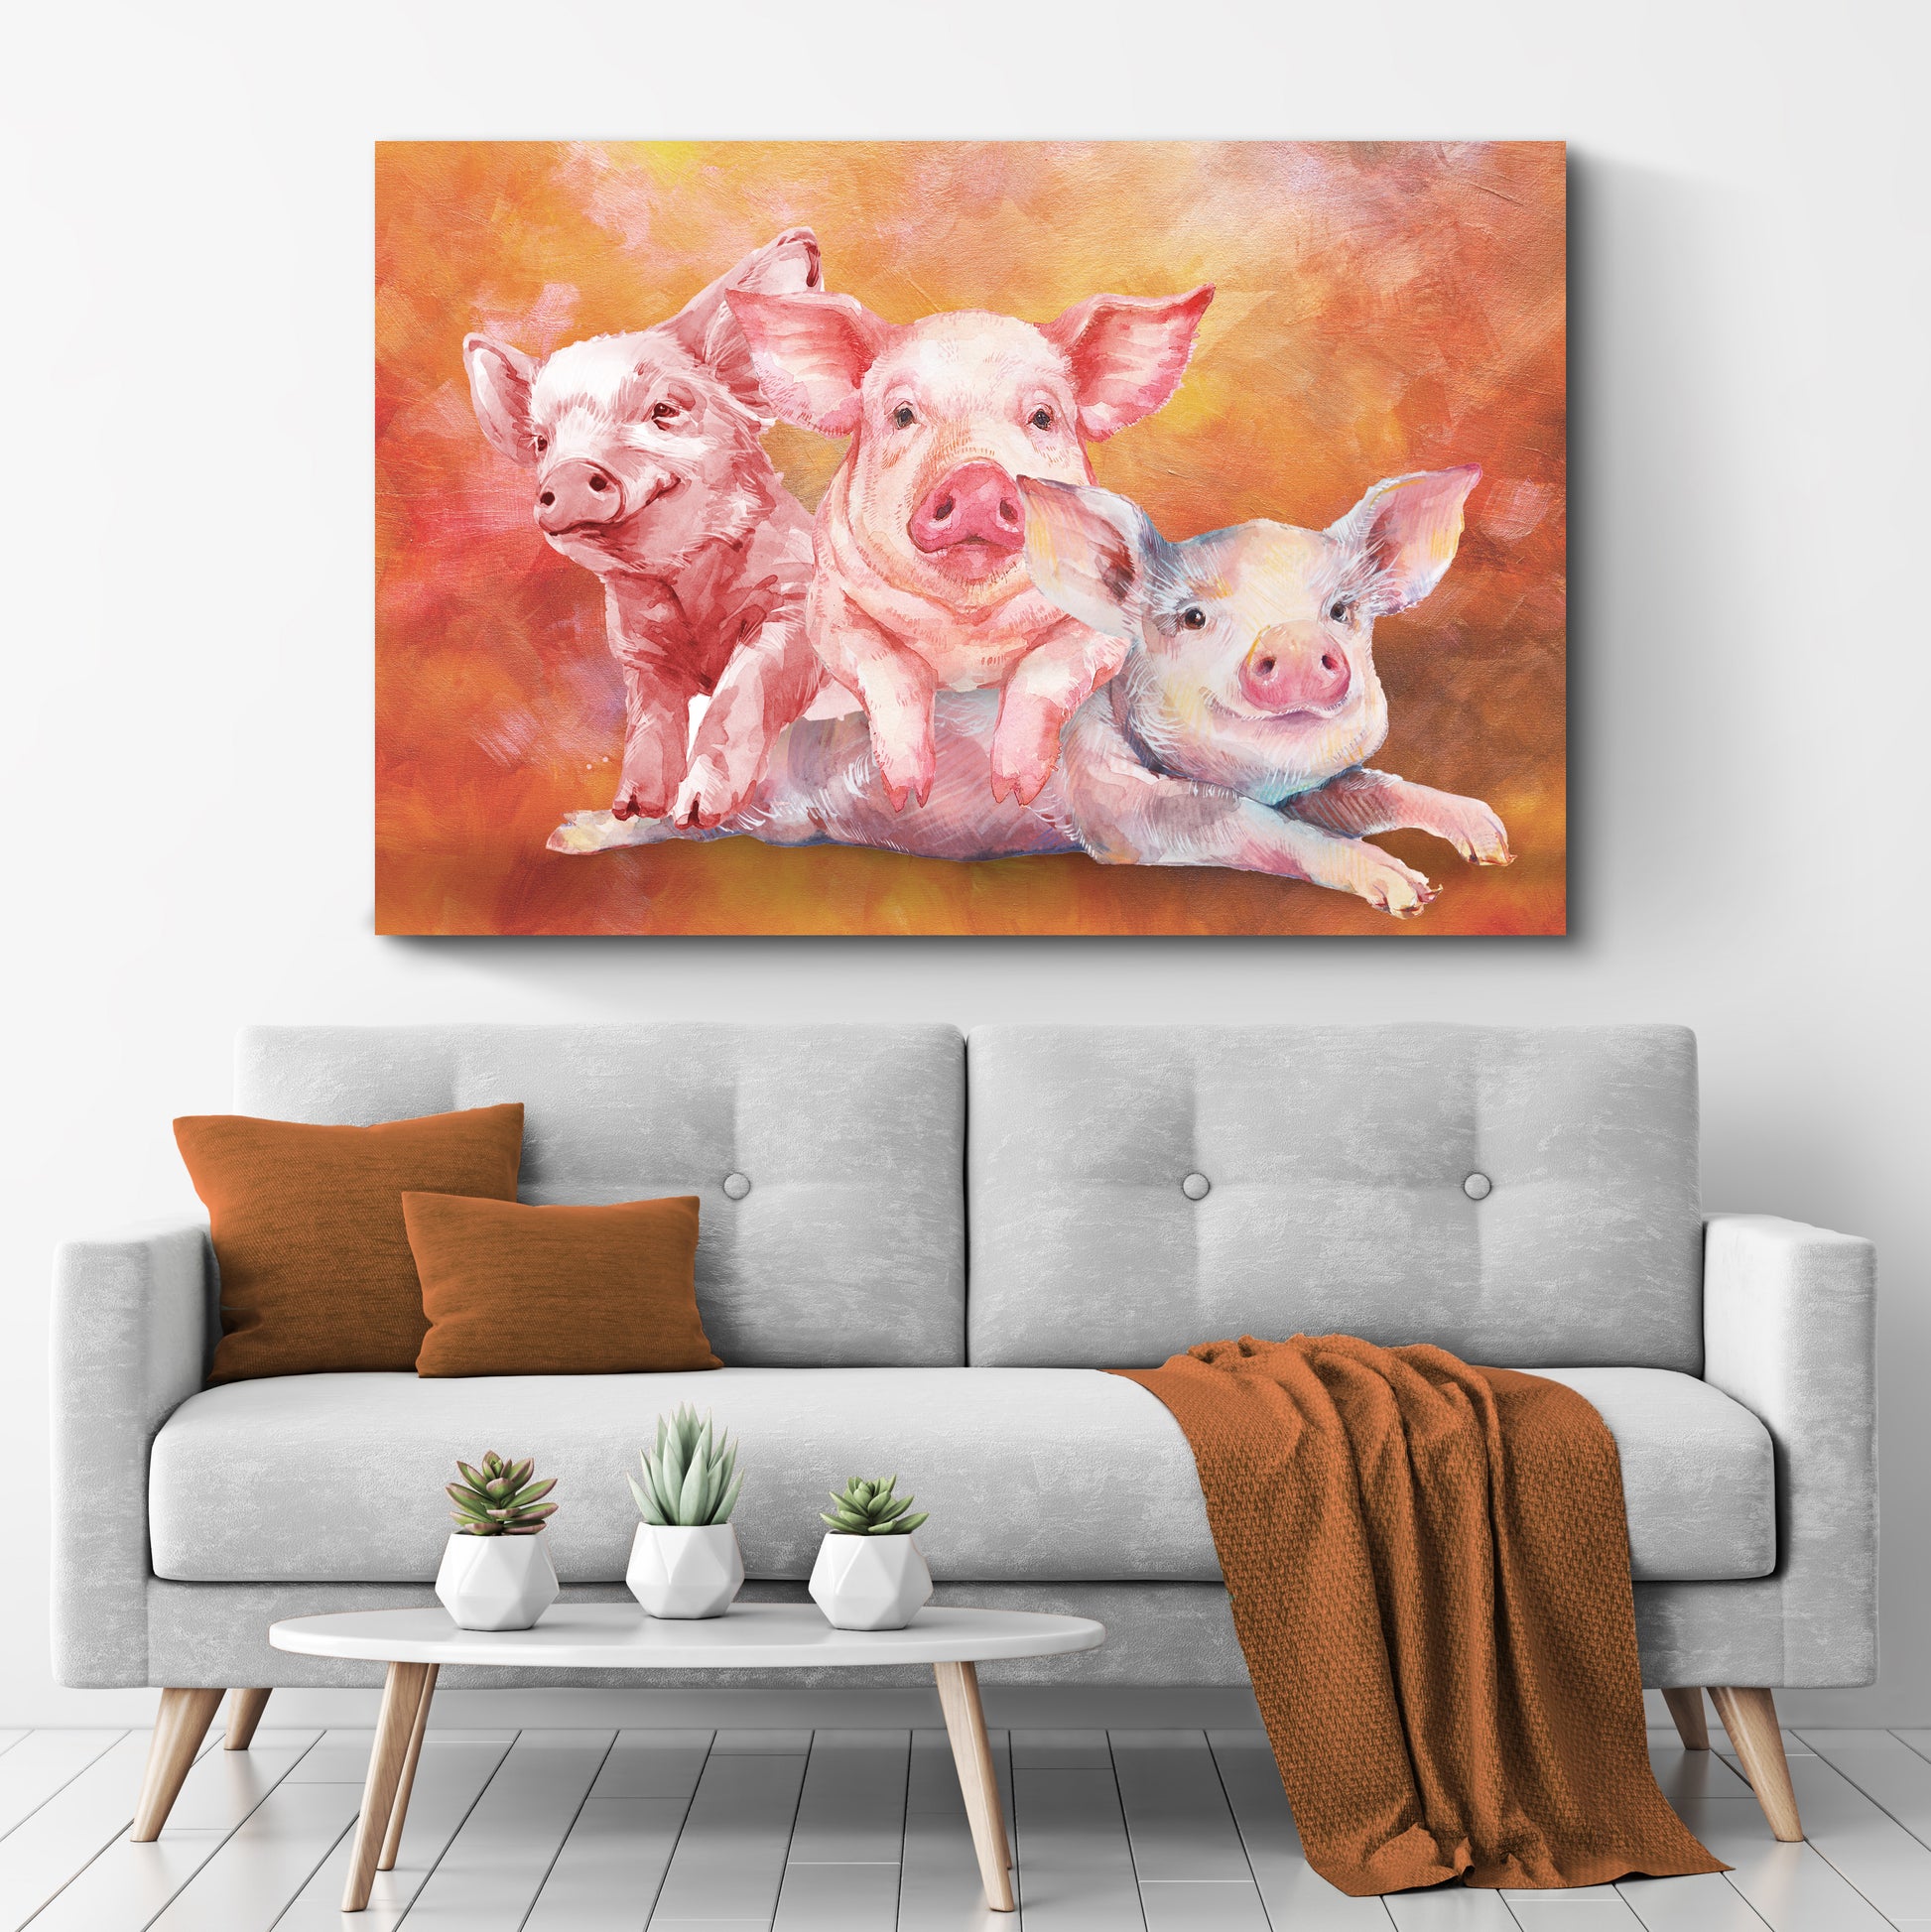 Three Baby Pigs Watercolor Canvas Wall Art Style 2 - Image by Tailored Canvases